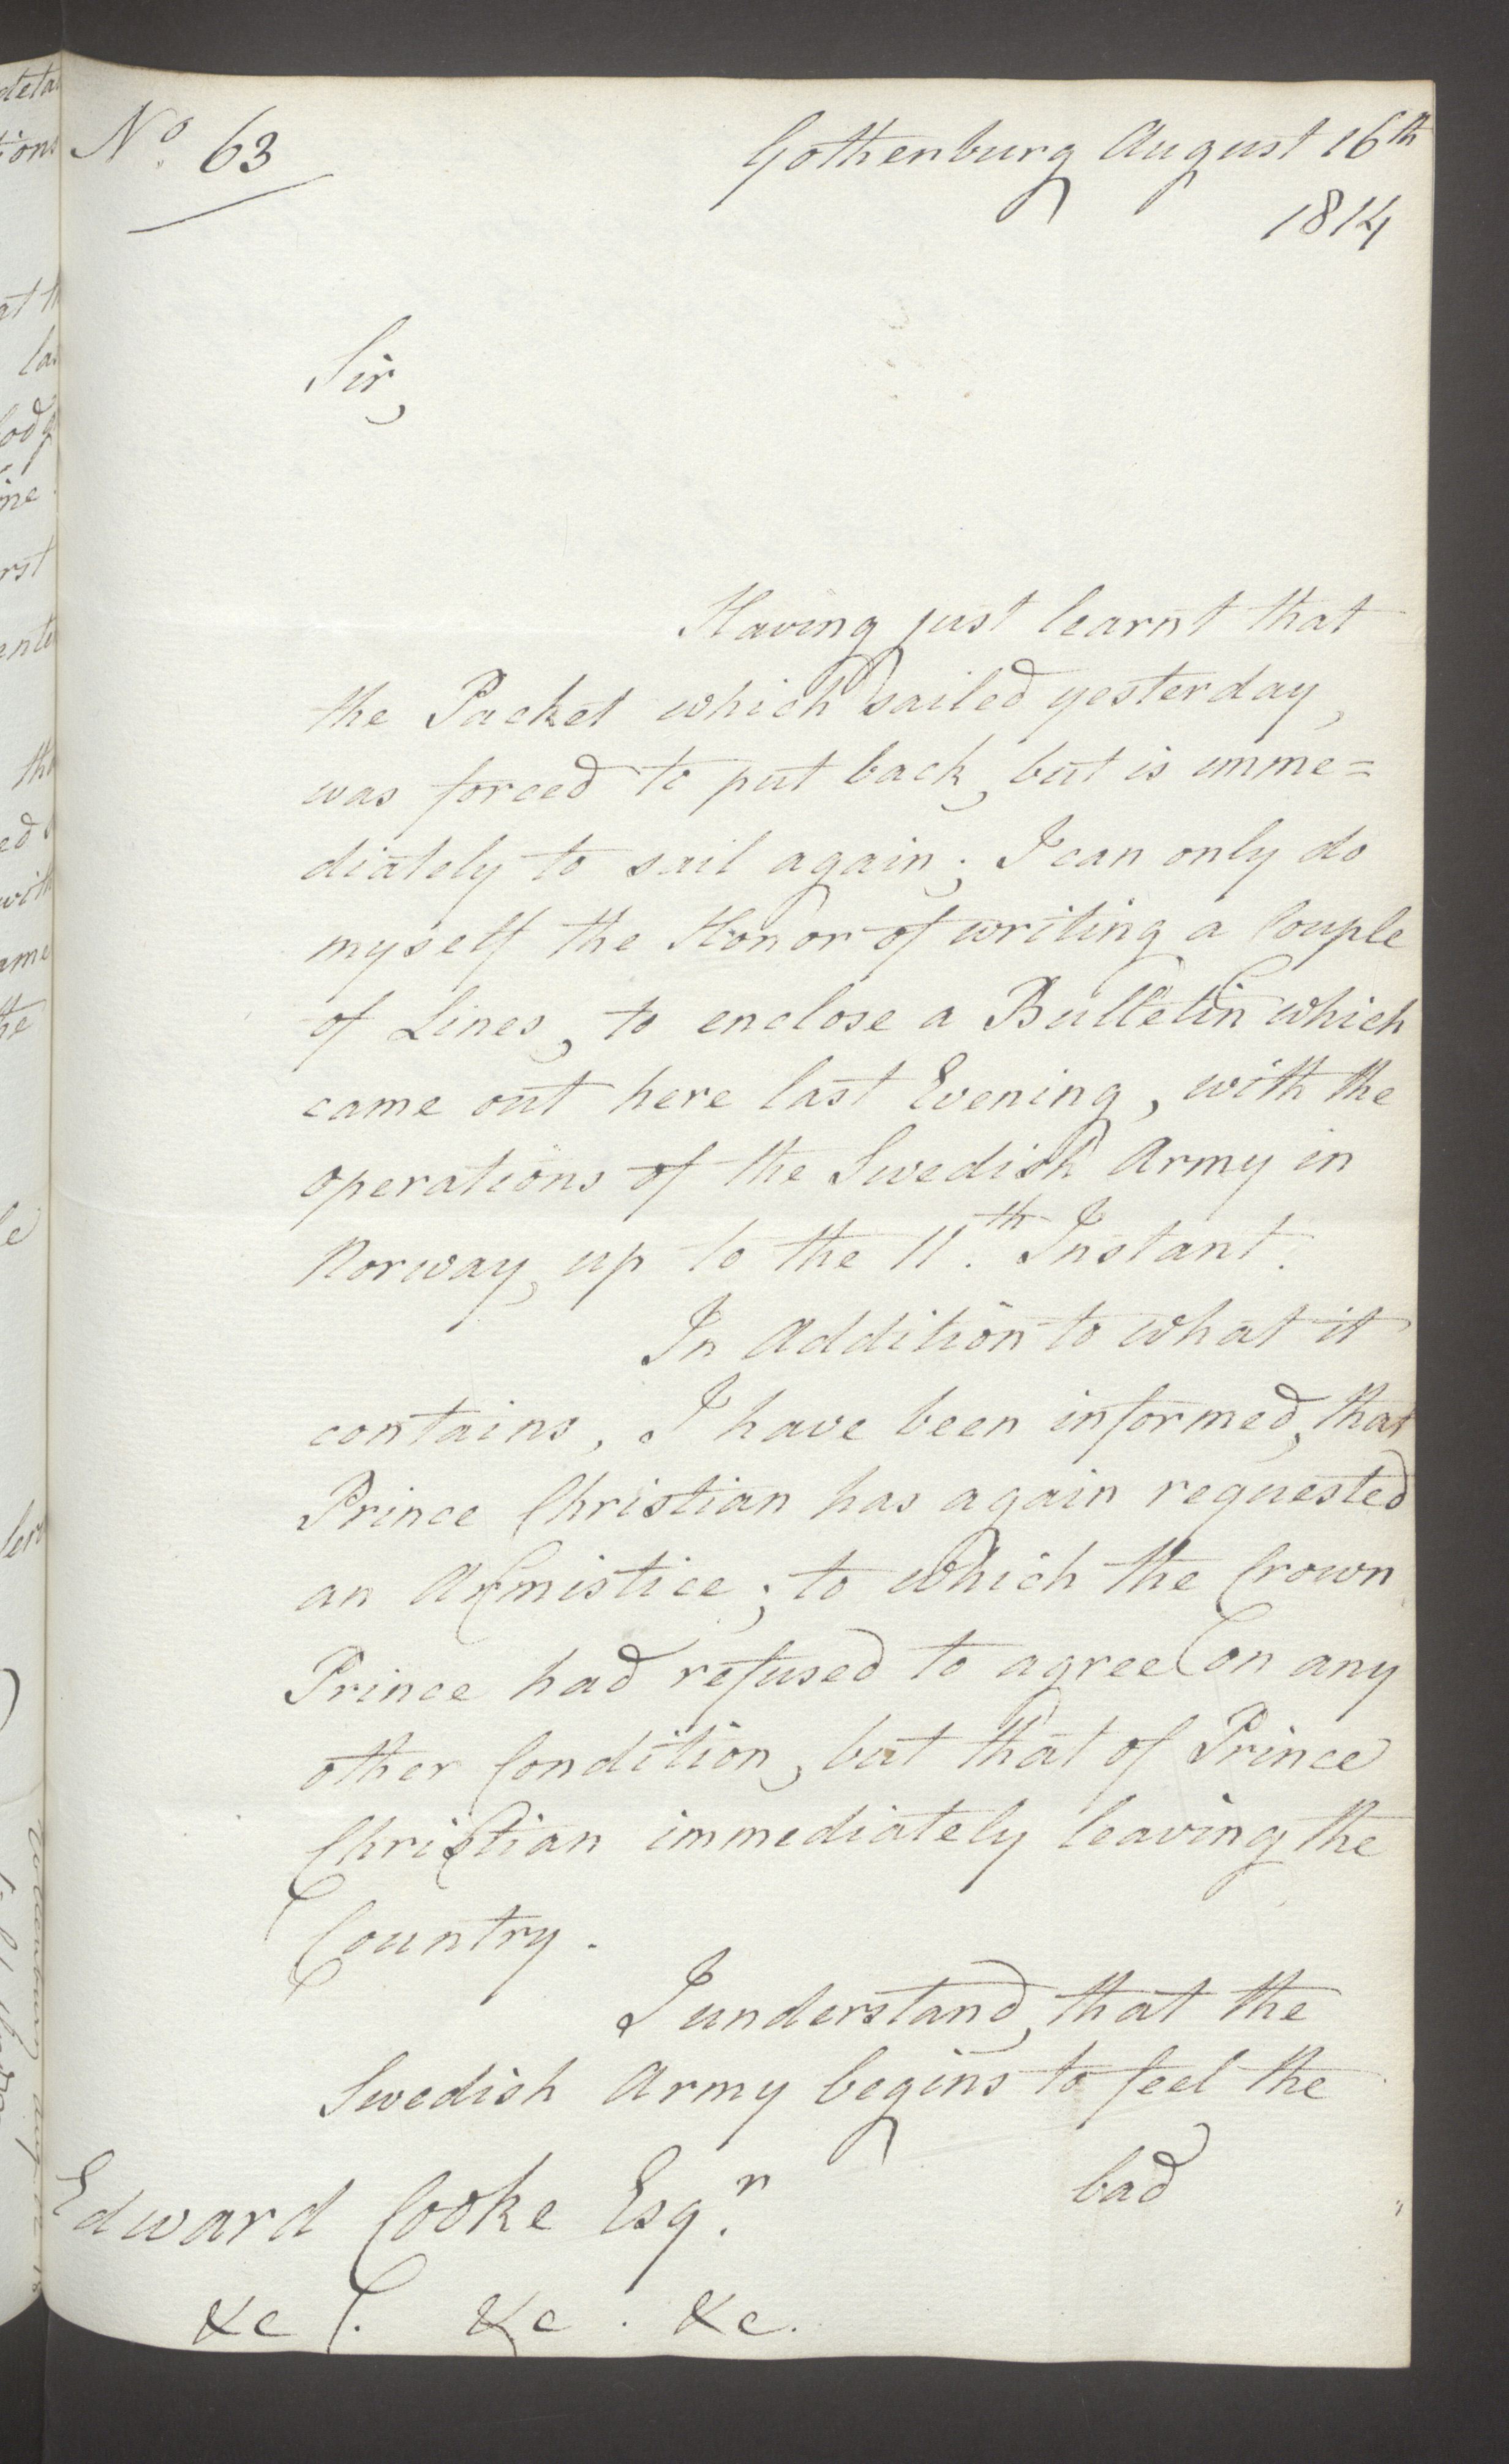 Foreign Office*, UKA/-/FO 38/16: Sir C. Gordon. Reports from Malmö, Jonkoping, and Helsingborg, 1814, p. 83